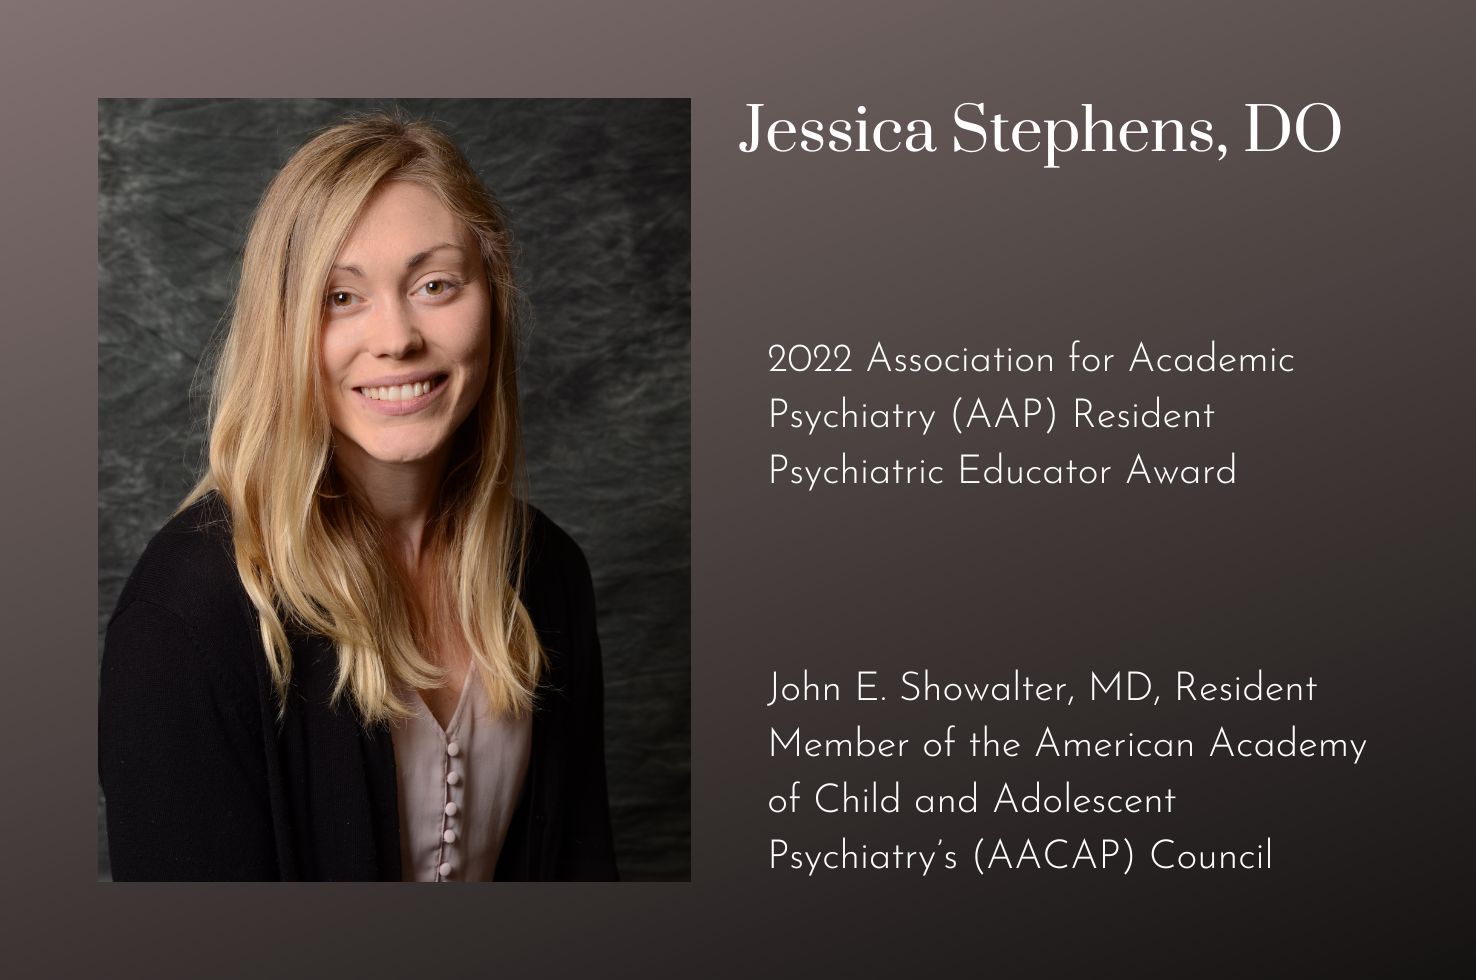 Child Psychiatry Resident Jessica Stephens, DO, Honored by AAP and AACAP